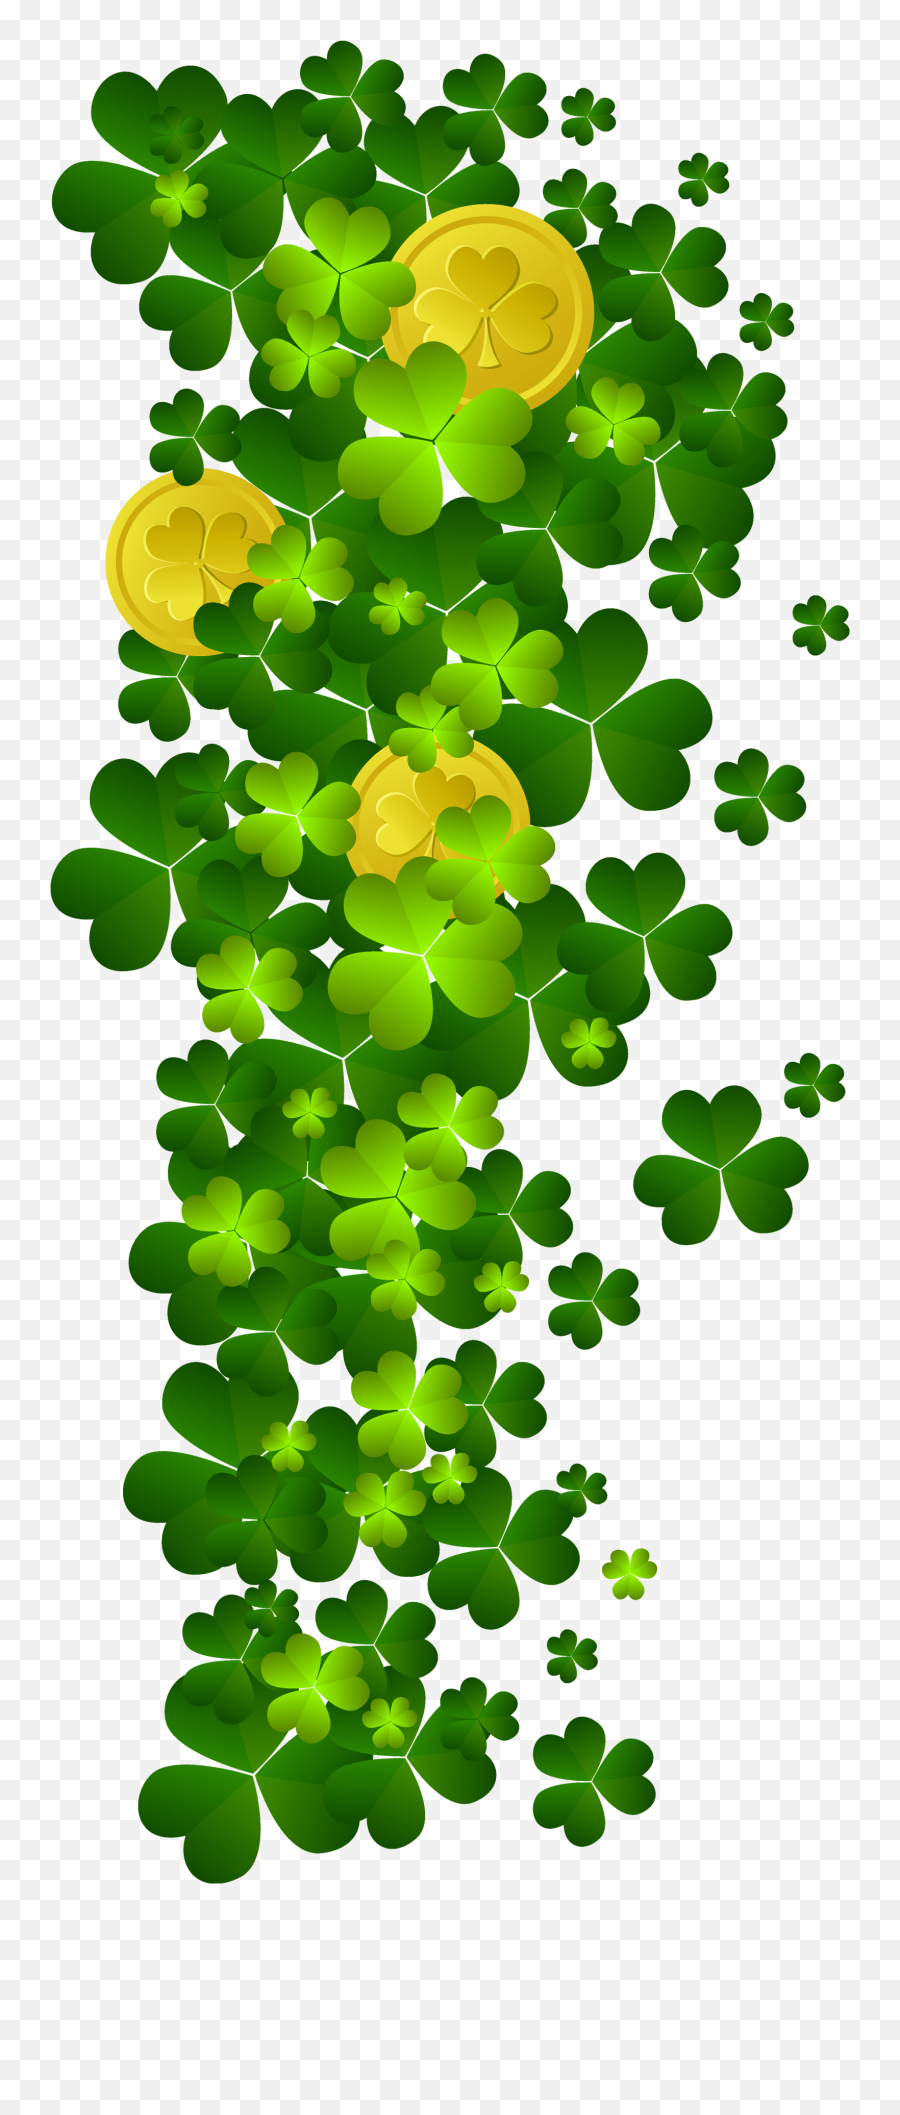 Download Free Plant Flora Ireland Patrick Shamrock Saint Day - Transparent Background St Day Clipart Png,St Patrick Day Png